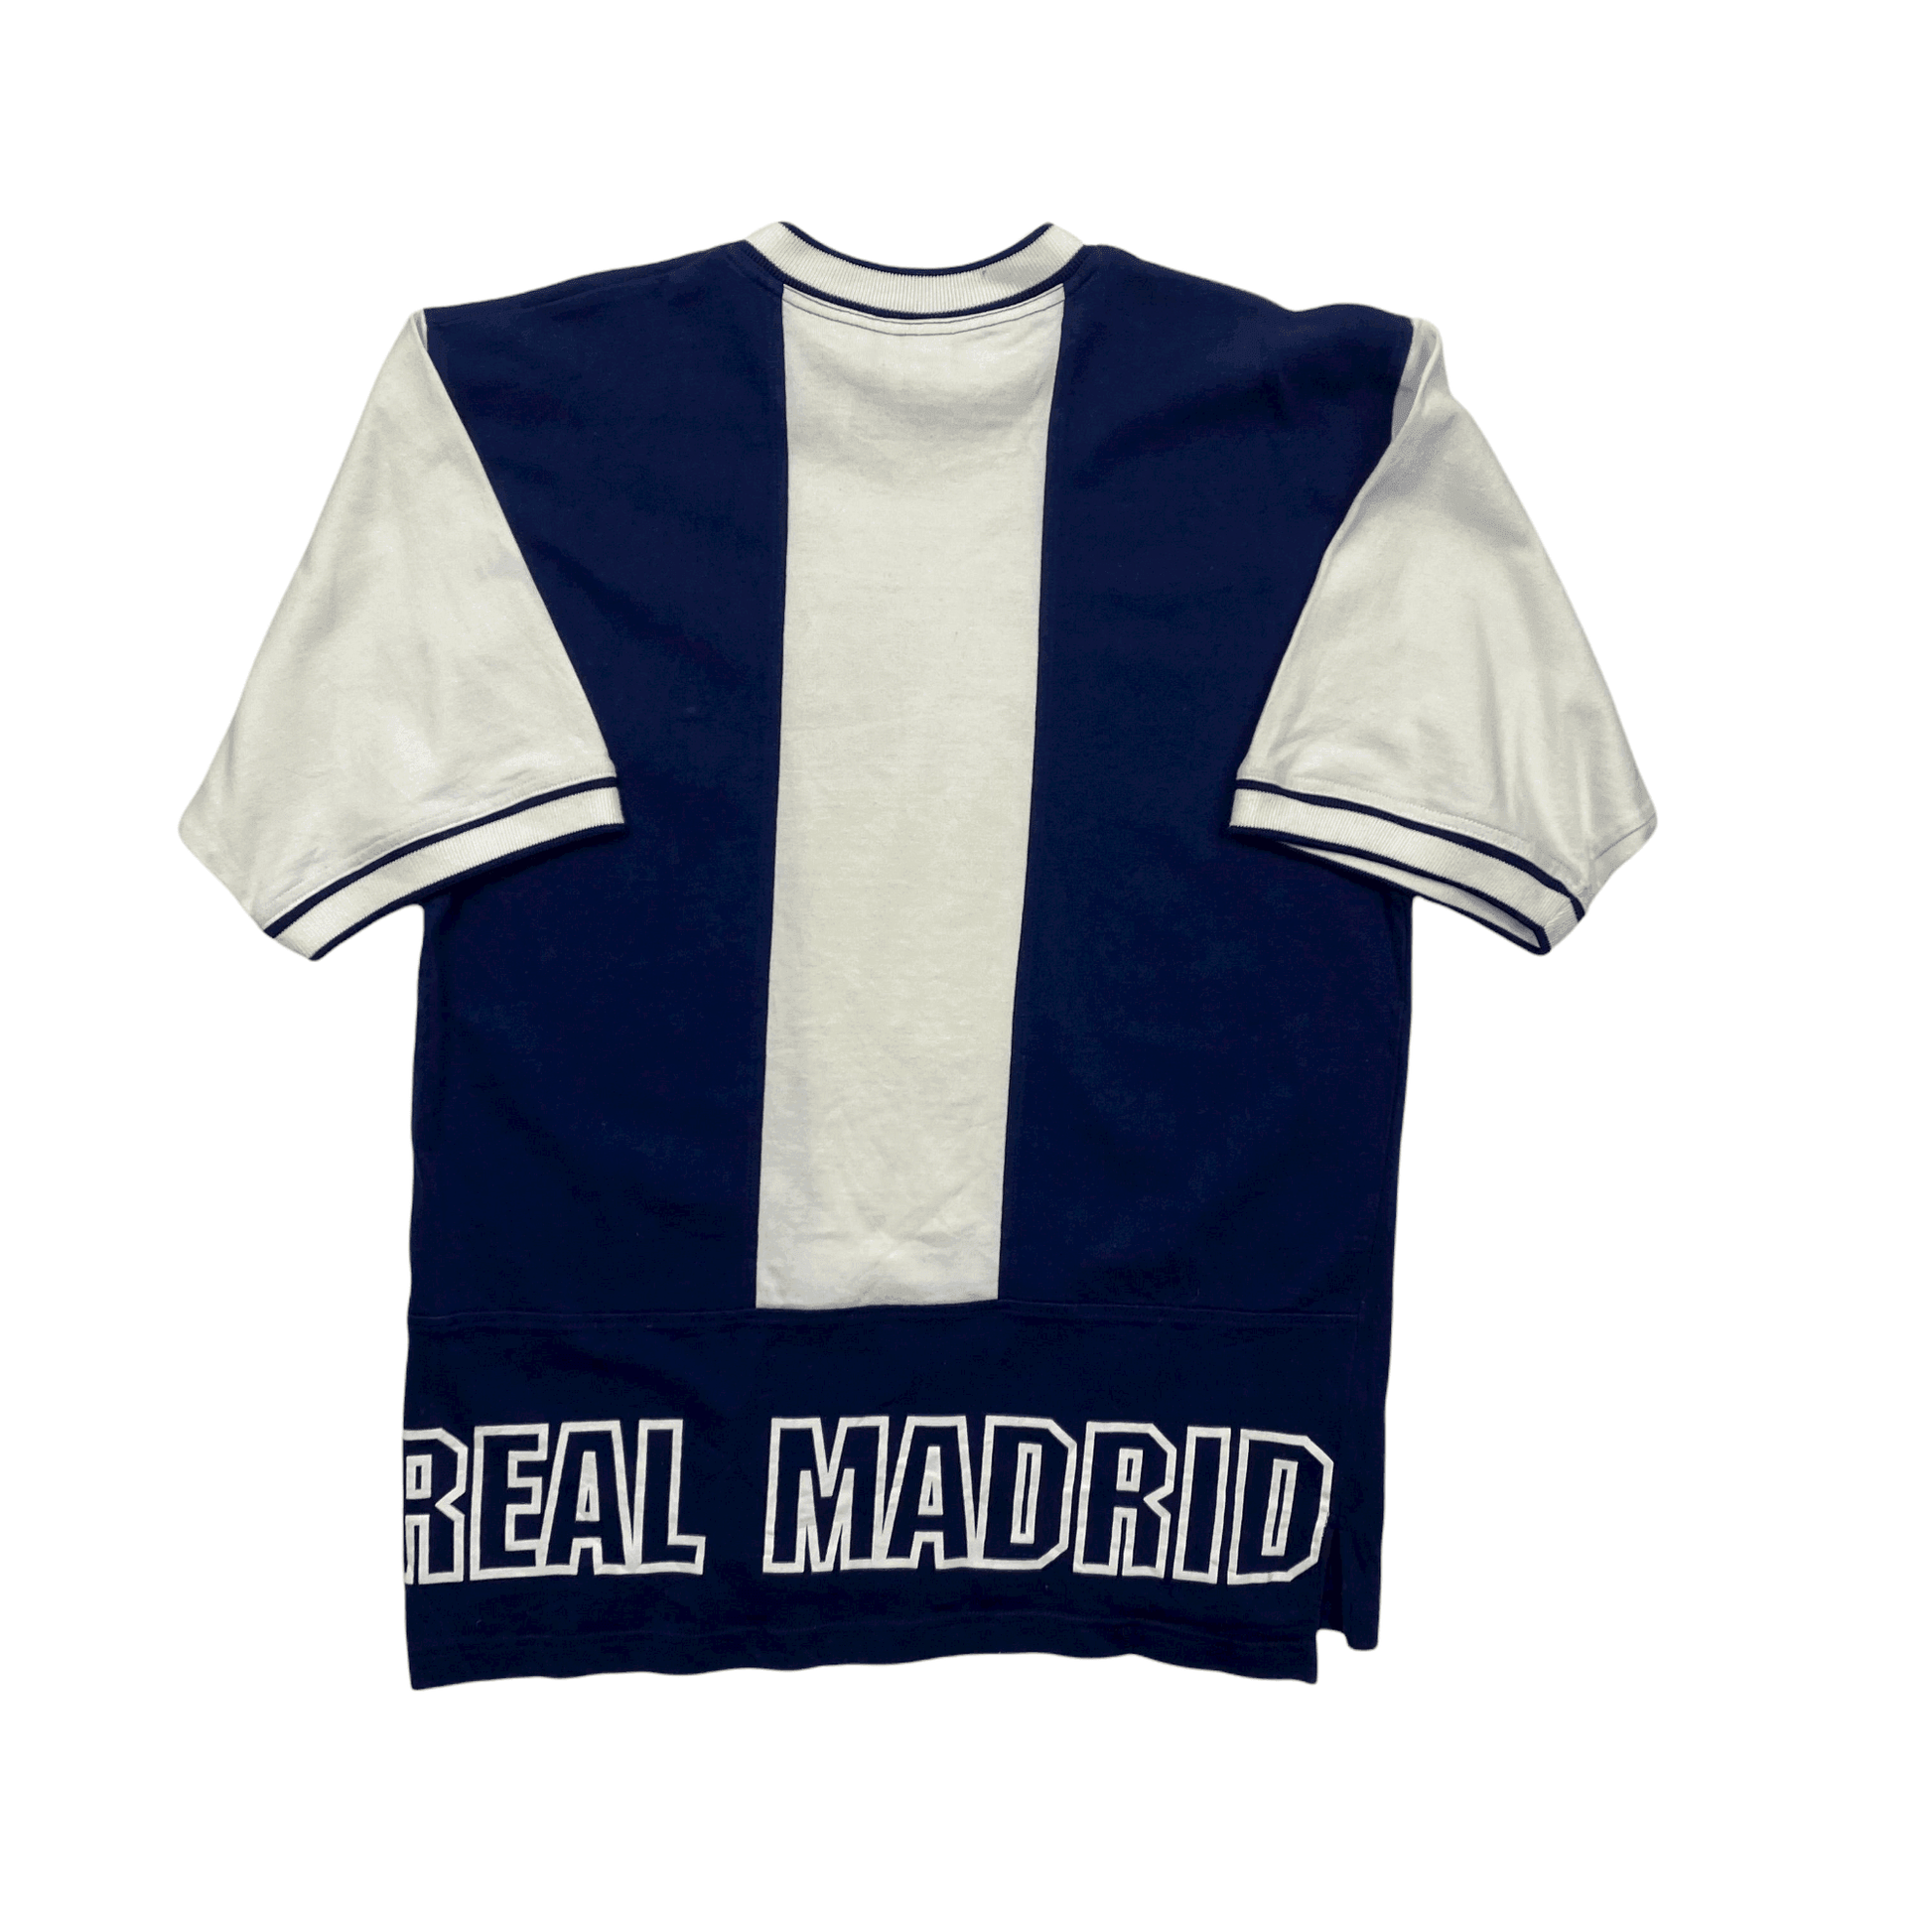 Vintage 90s White + Navy Blue Nike Real Madrid Football Tee - Small (Recommended Size - Medium) - The Streetwear Studio